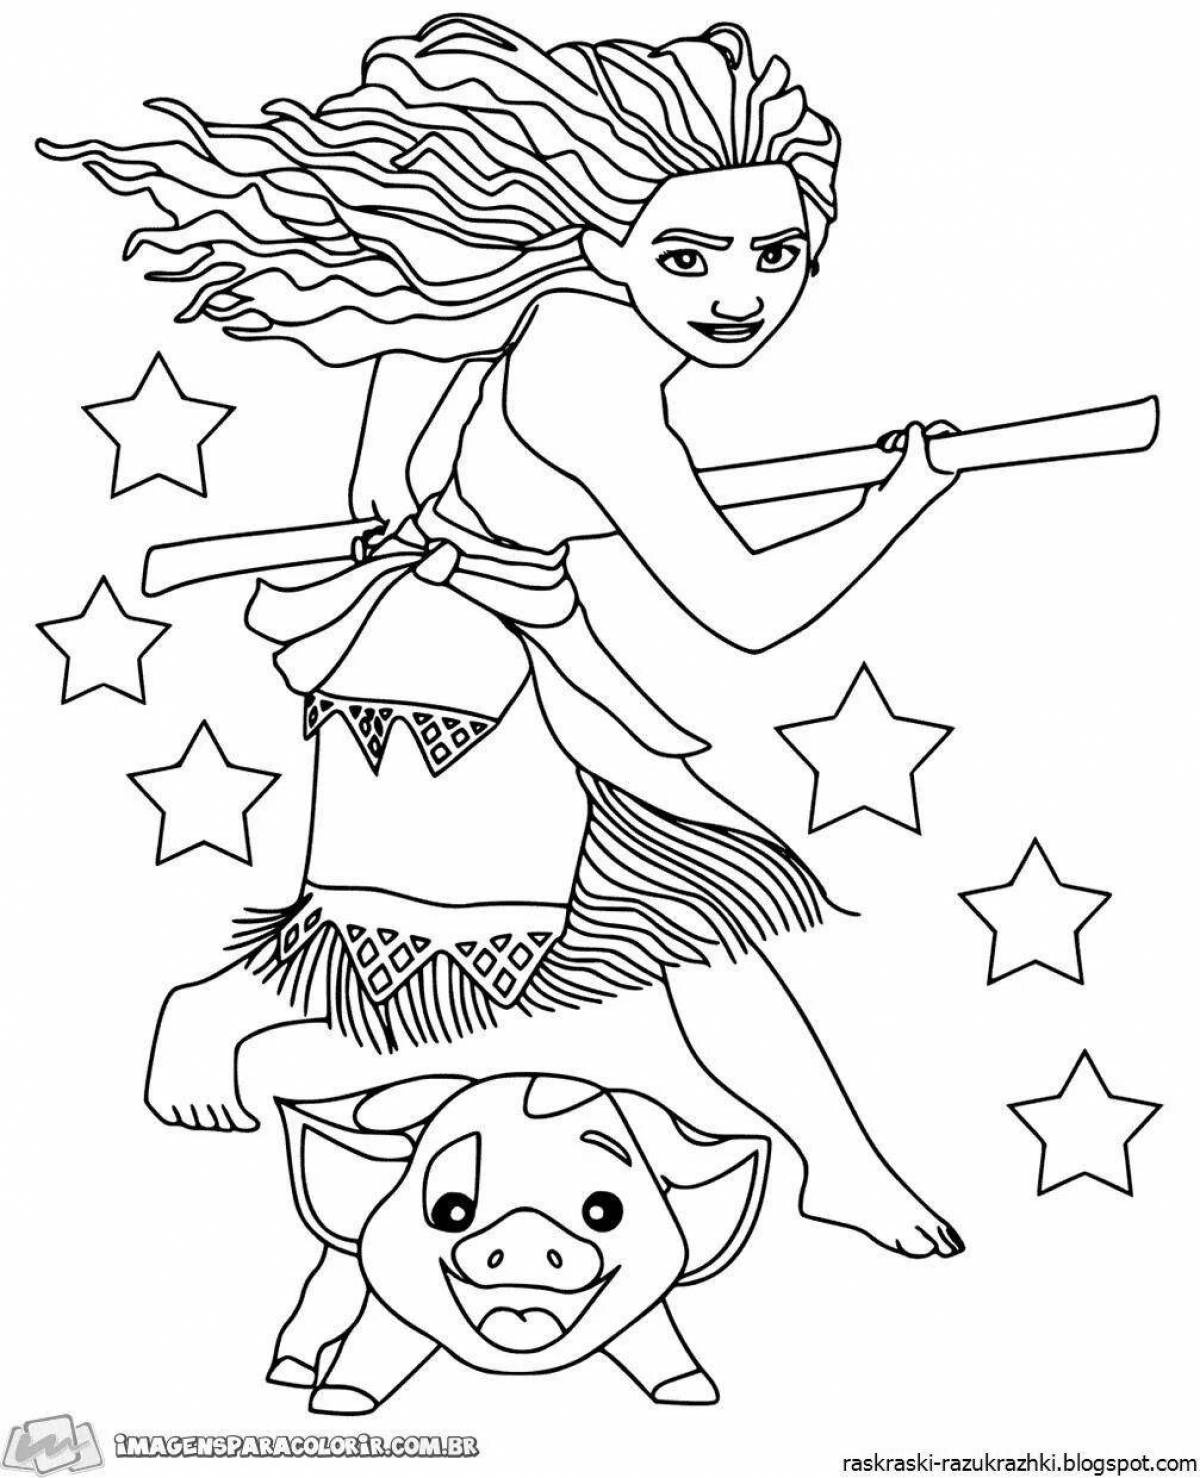 Gorgeous moana coloring book for girls